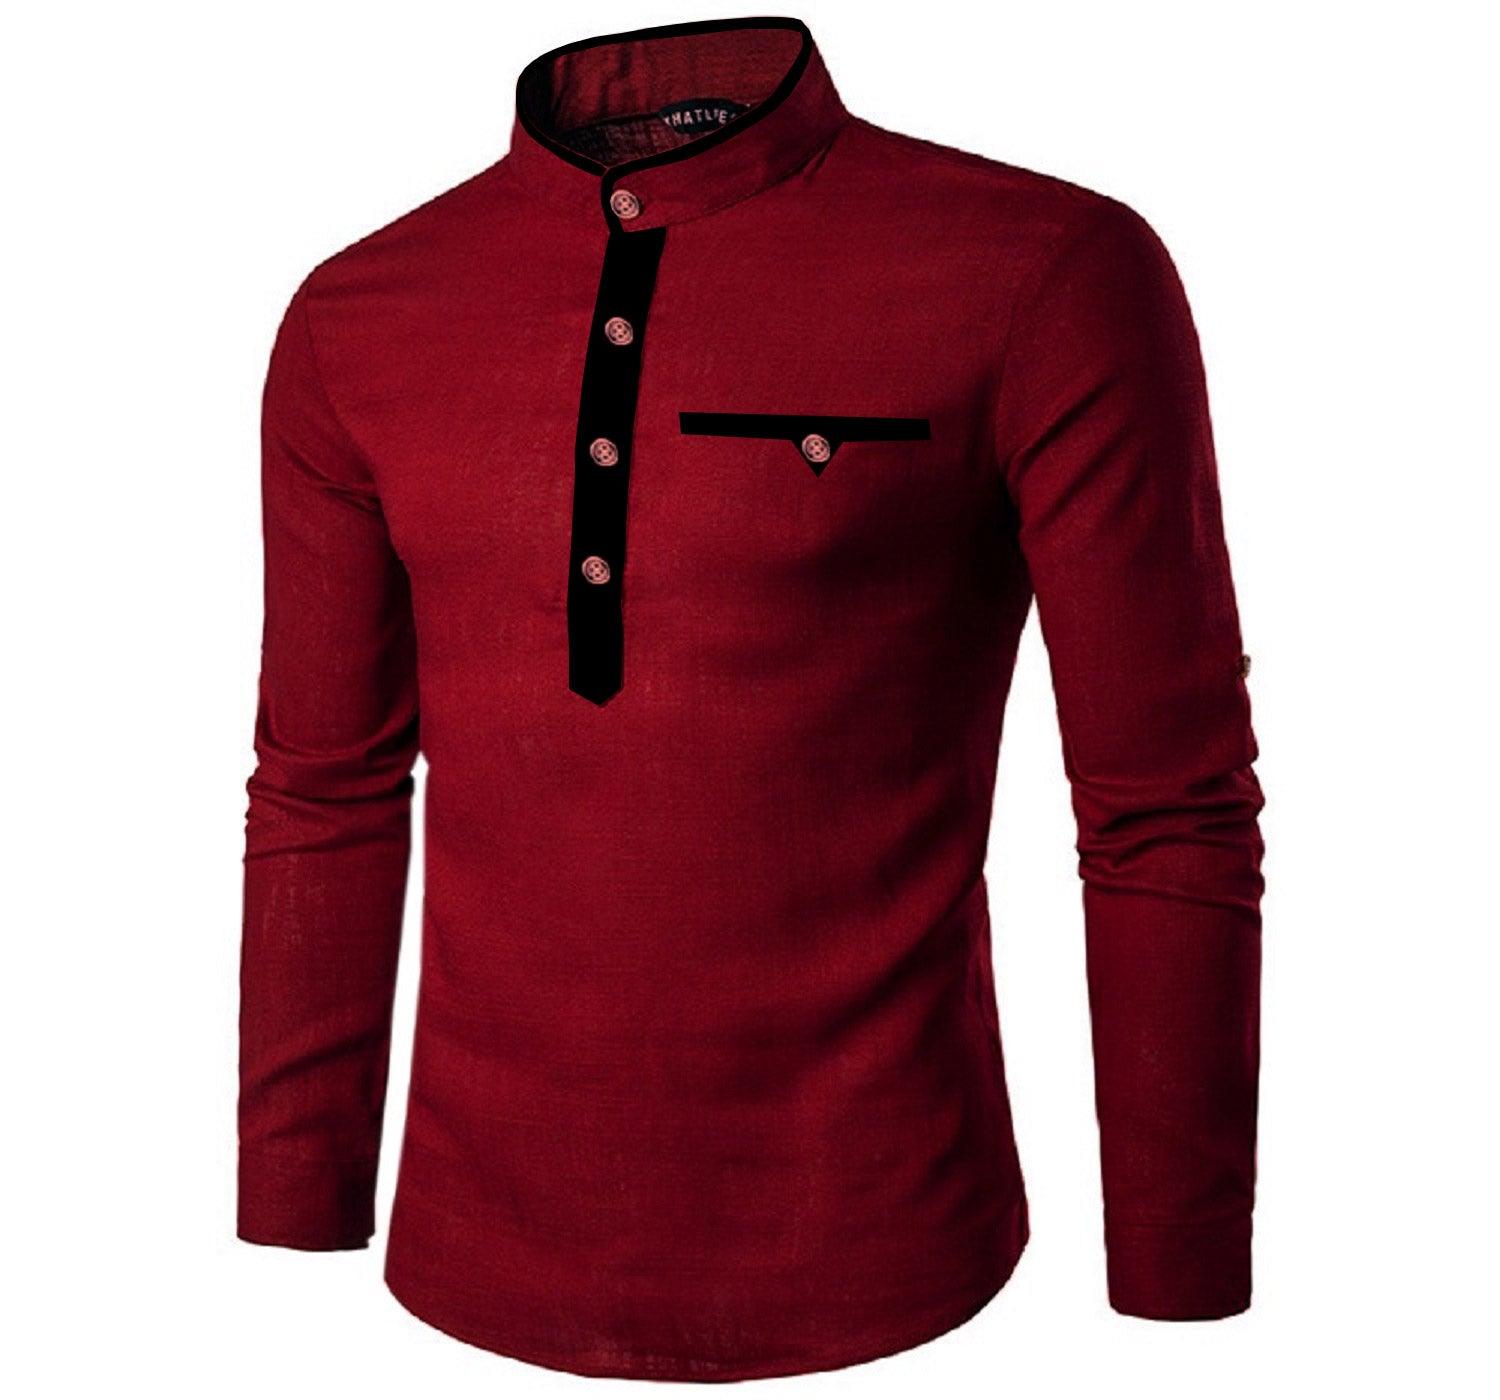 UDFABRIC Solid Cotton Casual Short Kurta For Men's - Maroon - UD FABRIC - Your Style our Design